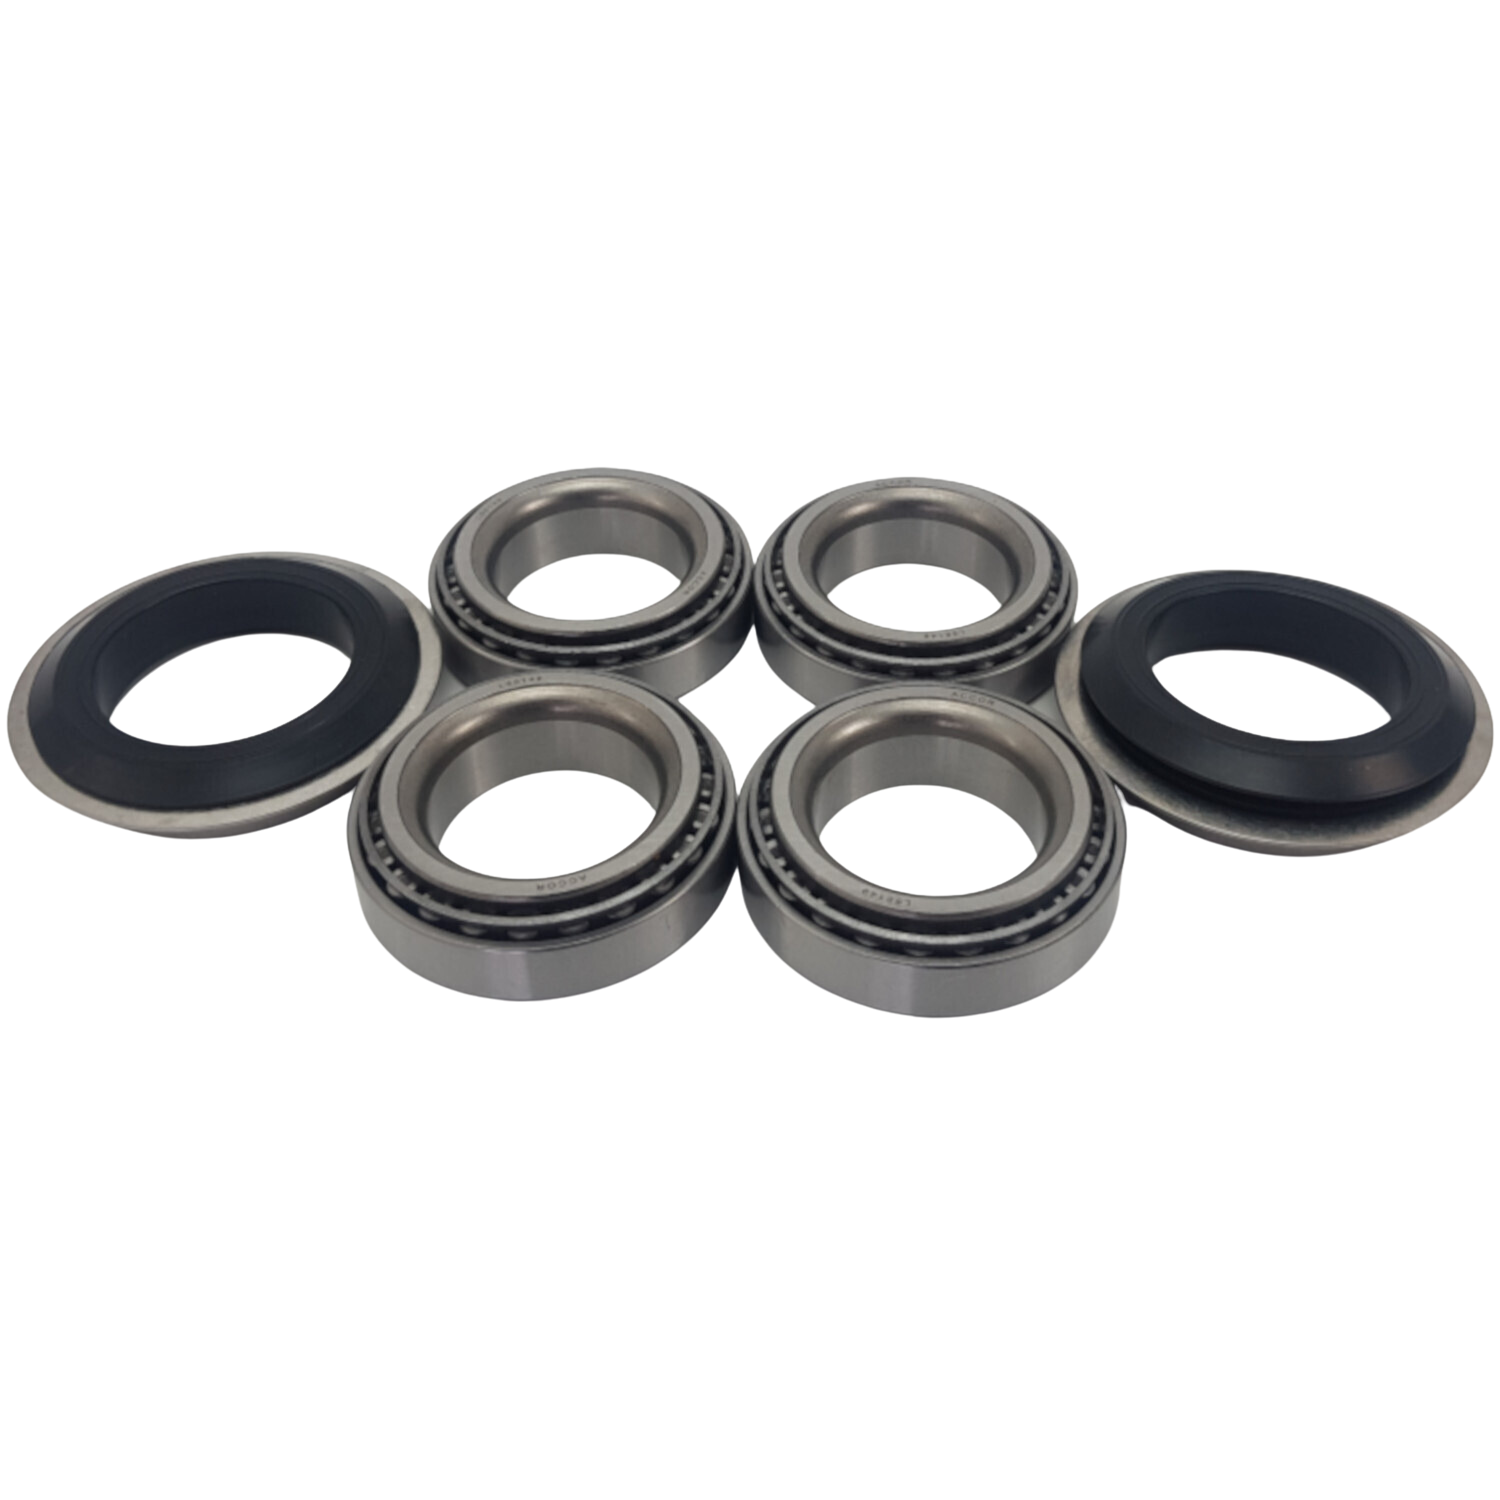 Trailer Wheel Bearing Kits x2 with Dustcap for Holden Axles. LM67048 and LM11949